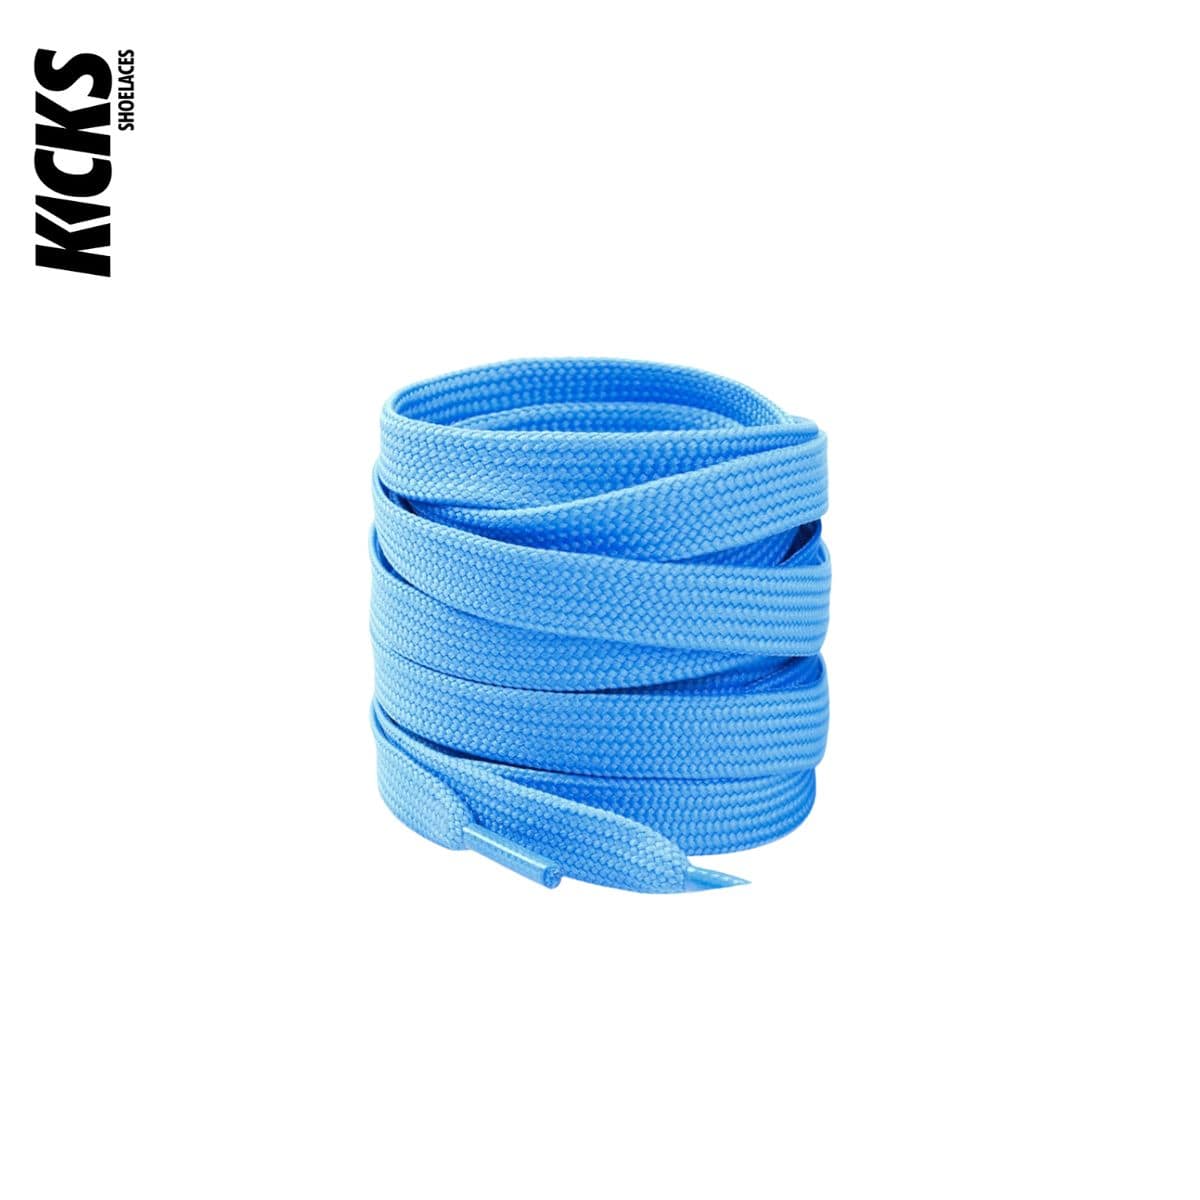 Sky Blue Replacement Shoe Laces for Adidas NMD Sneakers by Kicks Shoelaces